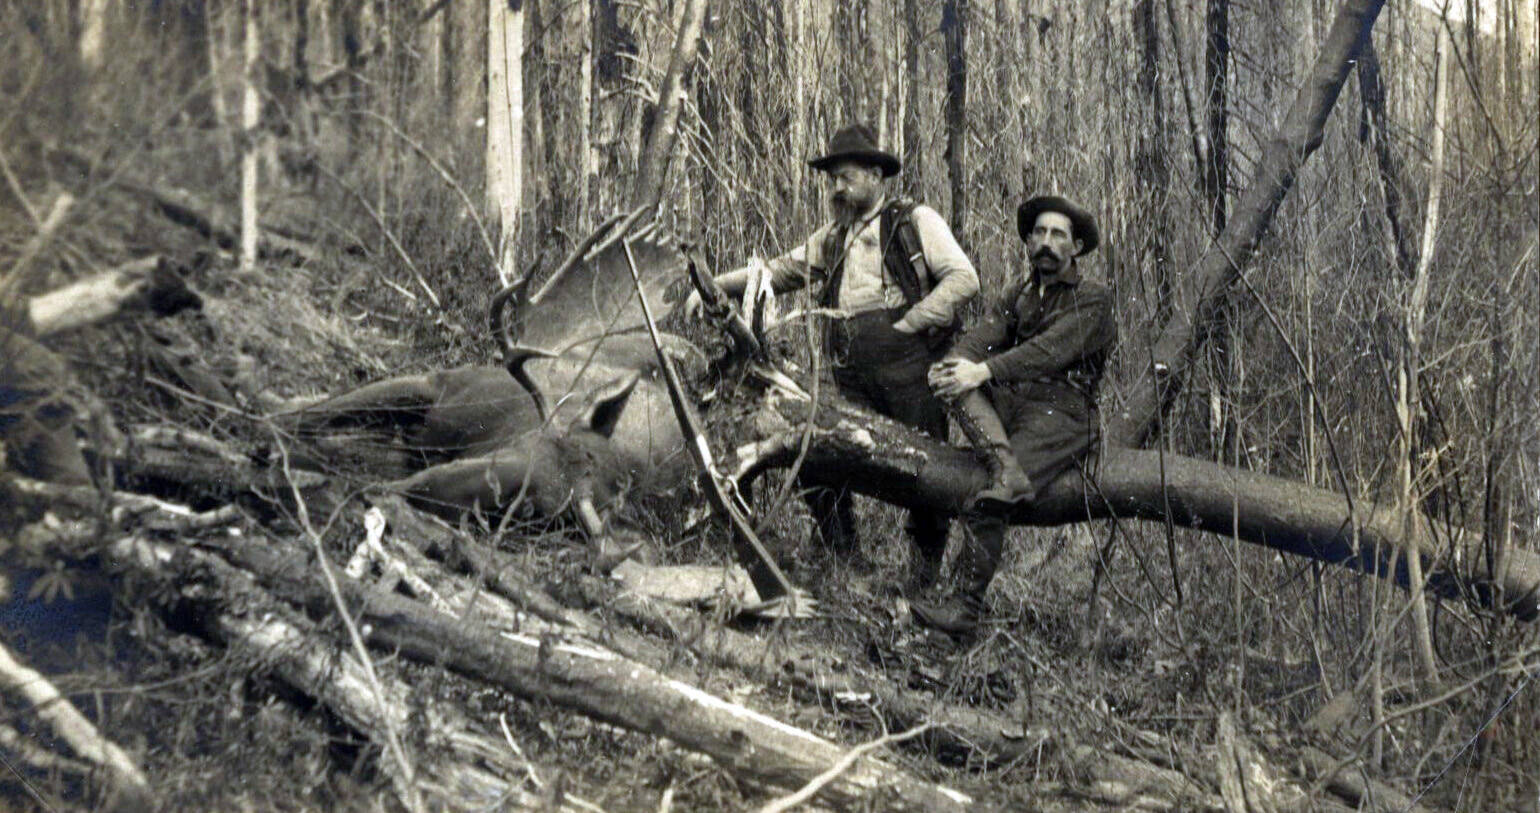 Photo #606.1.4 courtesy of the Resurrection Bay Historical Society
Skilled hunter John A. Baughman (L) and an unidentified man pose on the Kenai Peninsula with a large bull moose kill in about 1910.